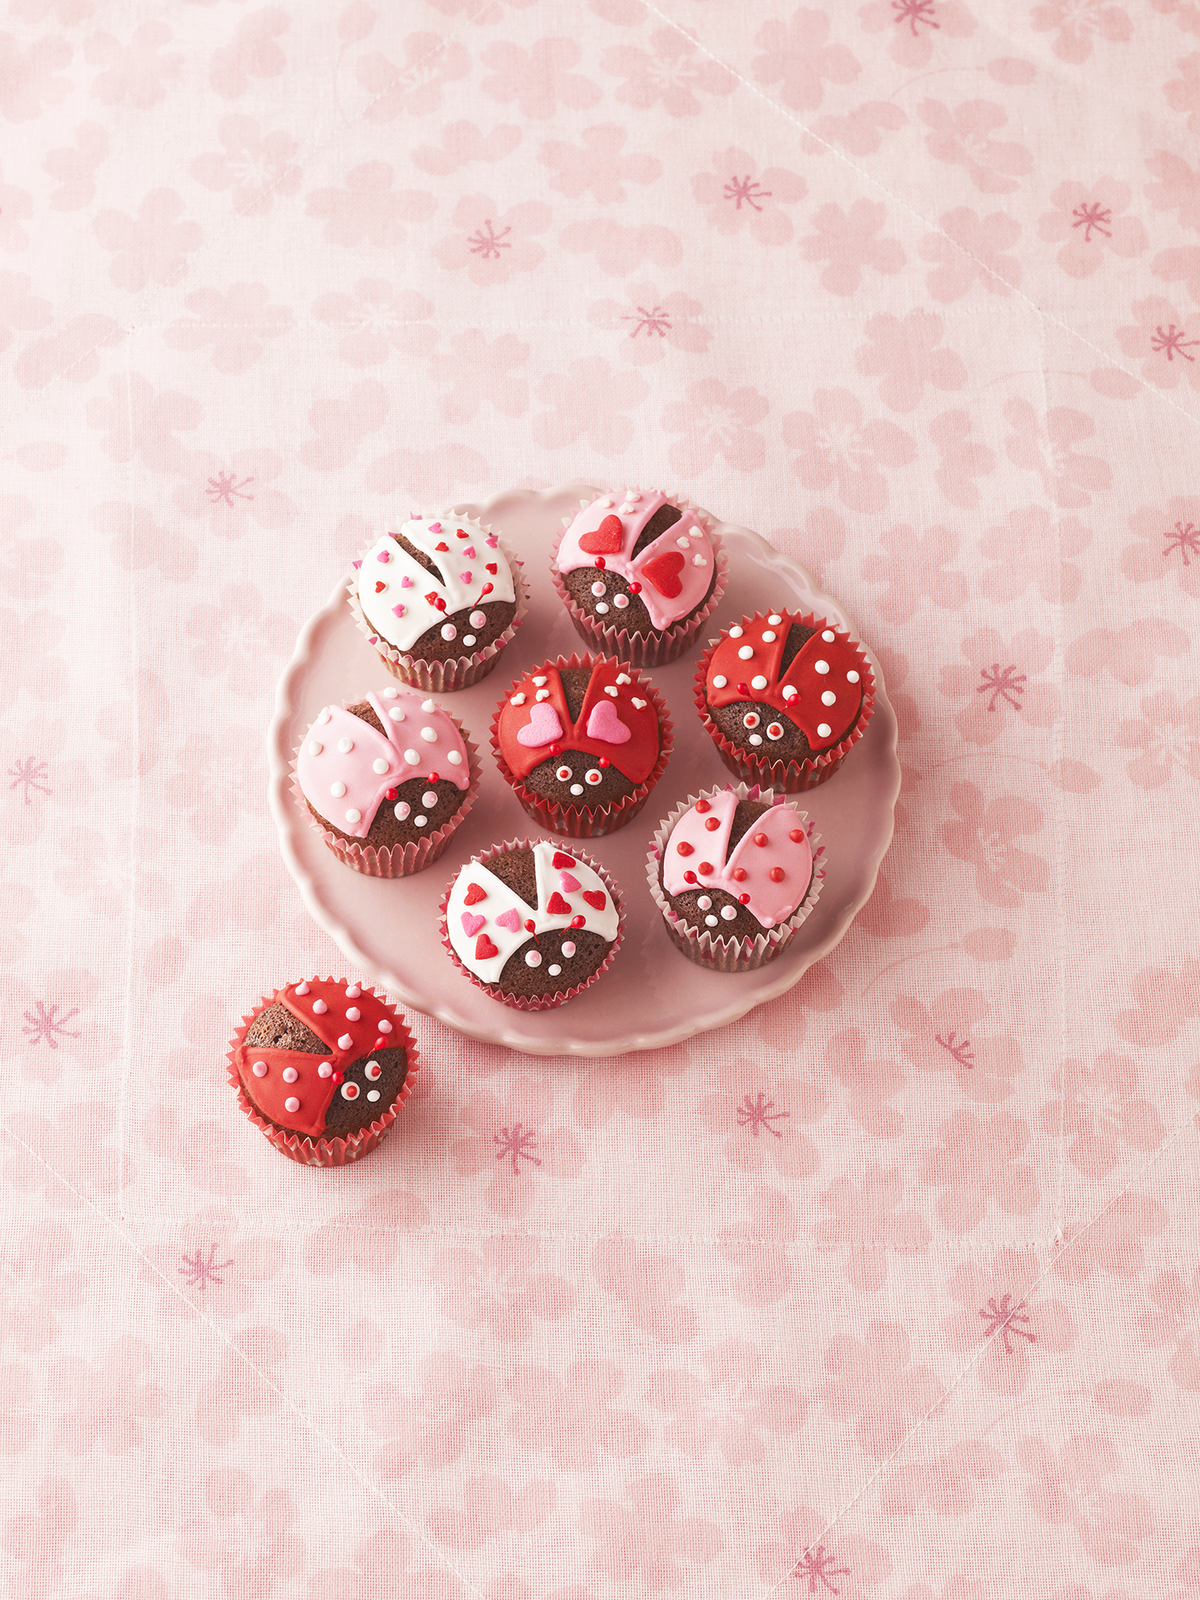 red and pink ladybug cupcakes for valentine's day